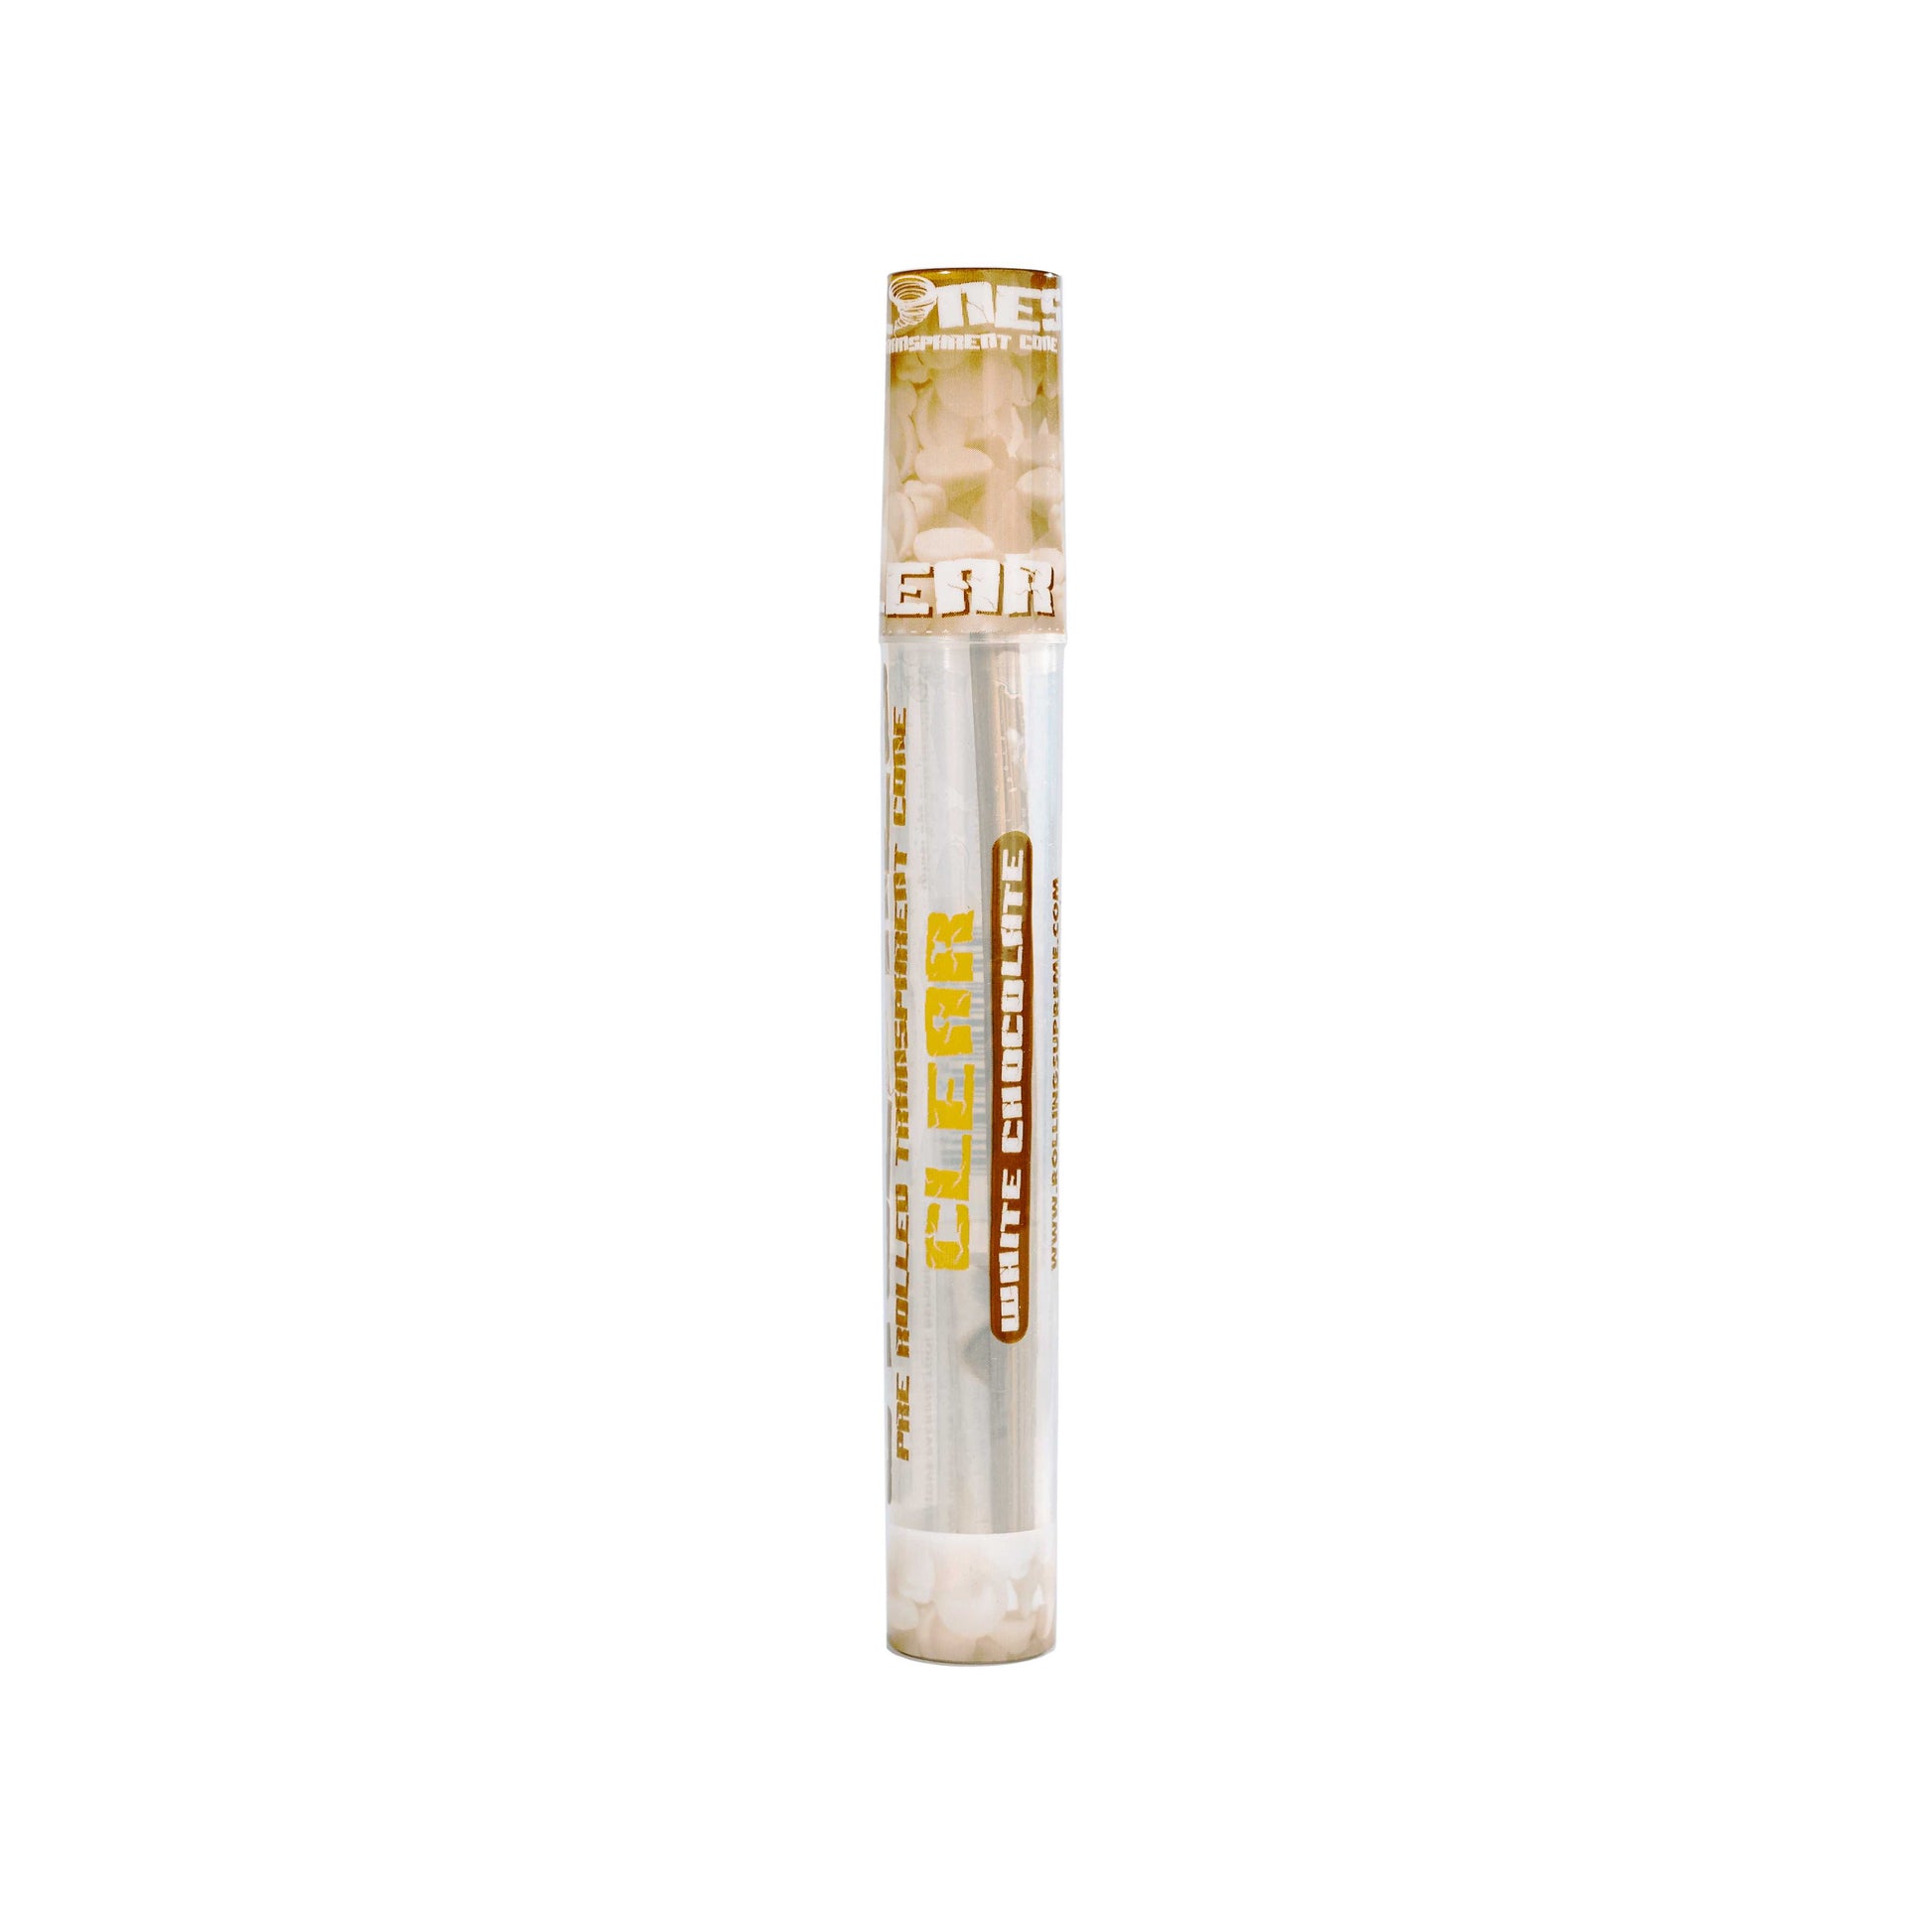 Cyclones Clear Pre-Roll Cones - White Chocolate - - Pre-rolls - Cyclones - Cali Tobacconist